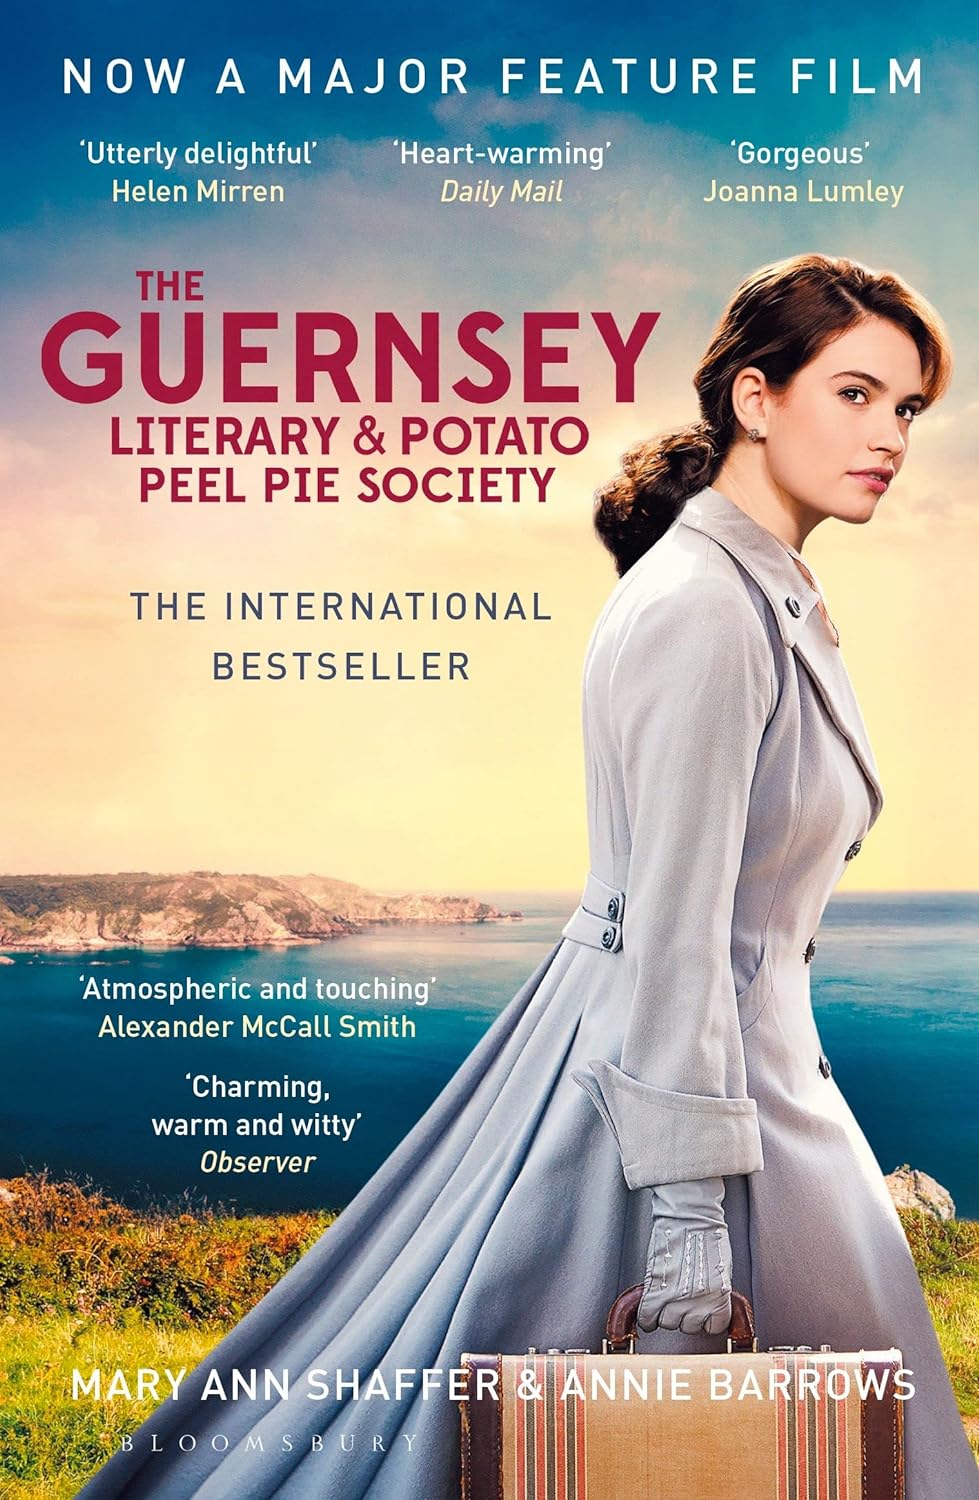 The Guernsey Literary and Potato Peel Pie Society by Annie Barrows and Mary Ann Shaffer